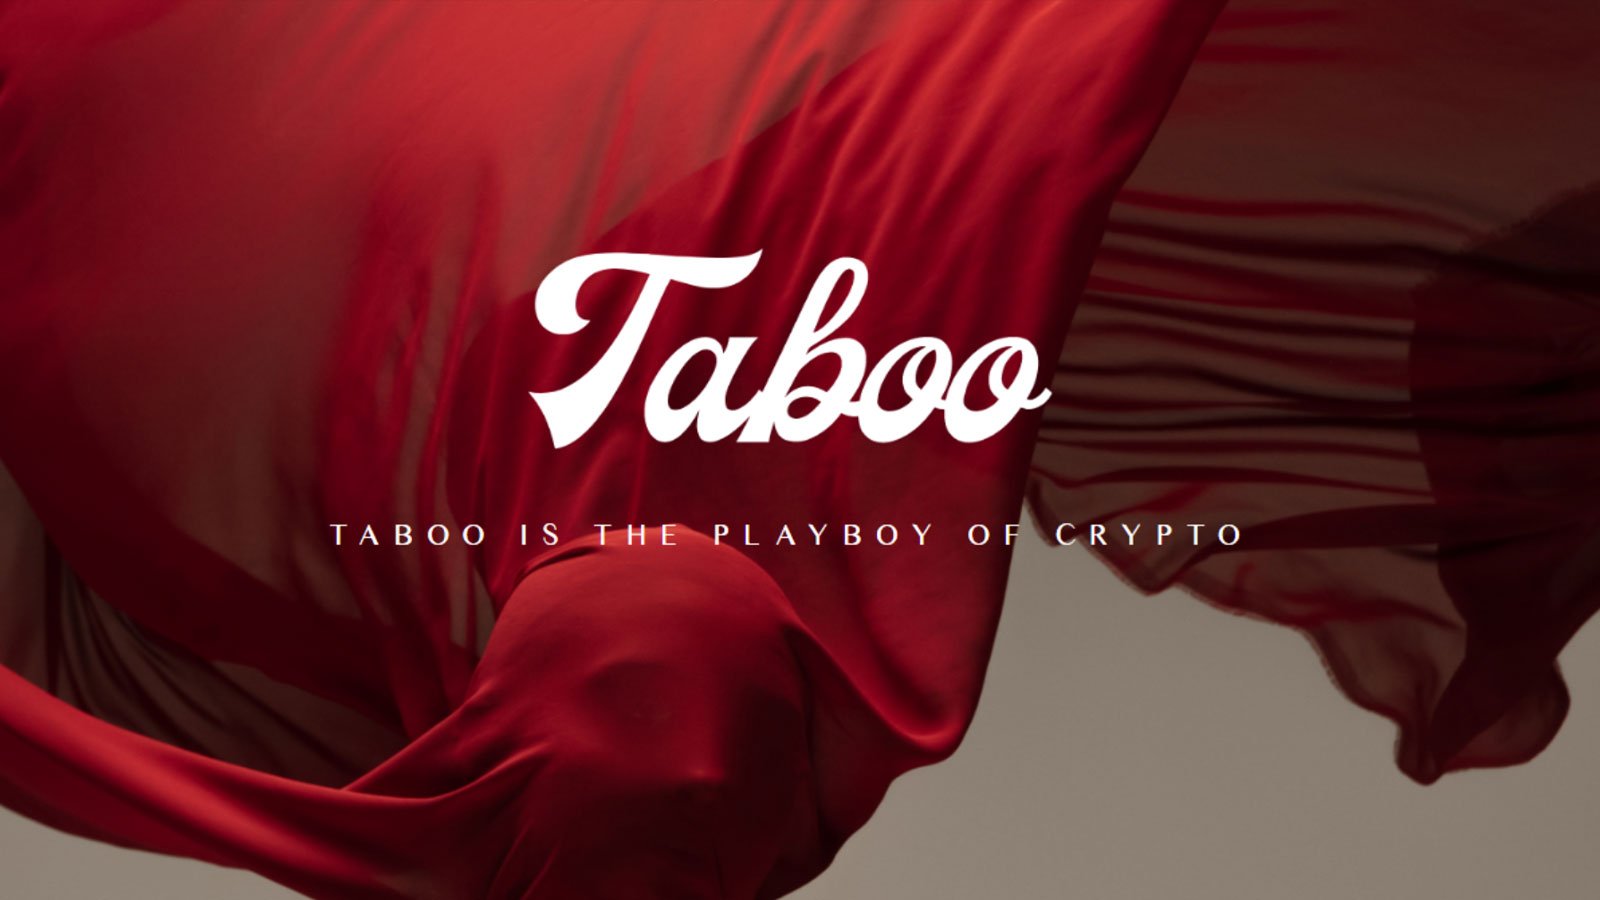 TABOO Kick Starts the Bull Market with a 300% Price Increase